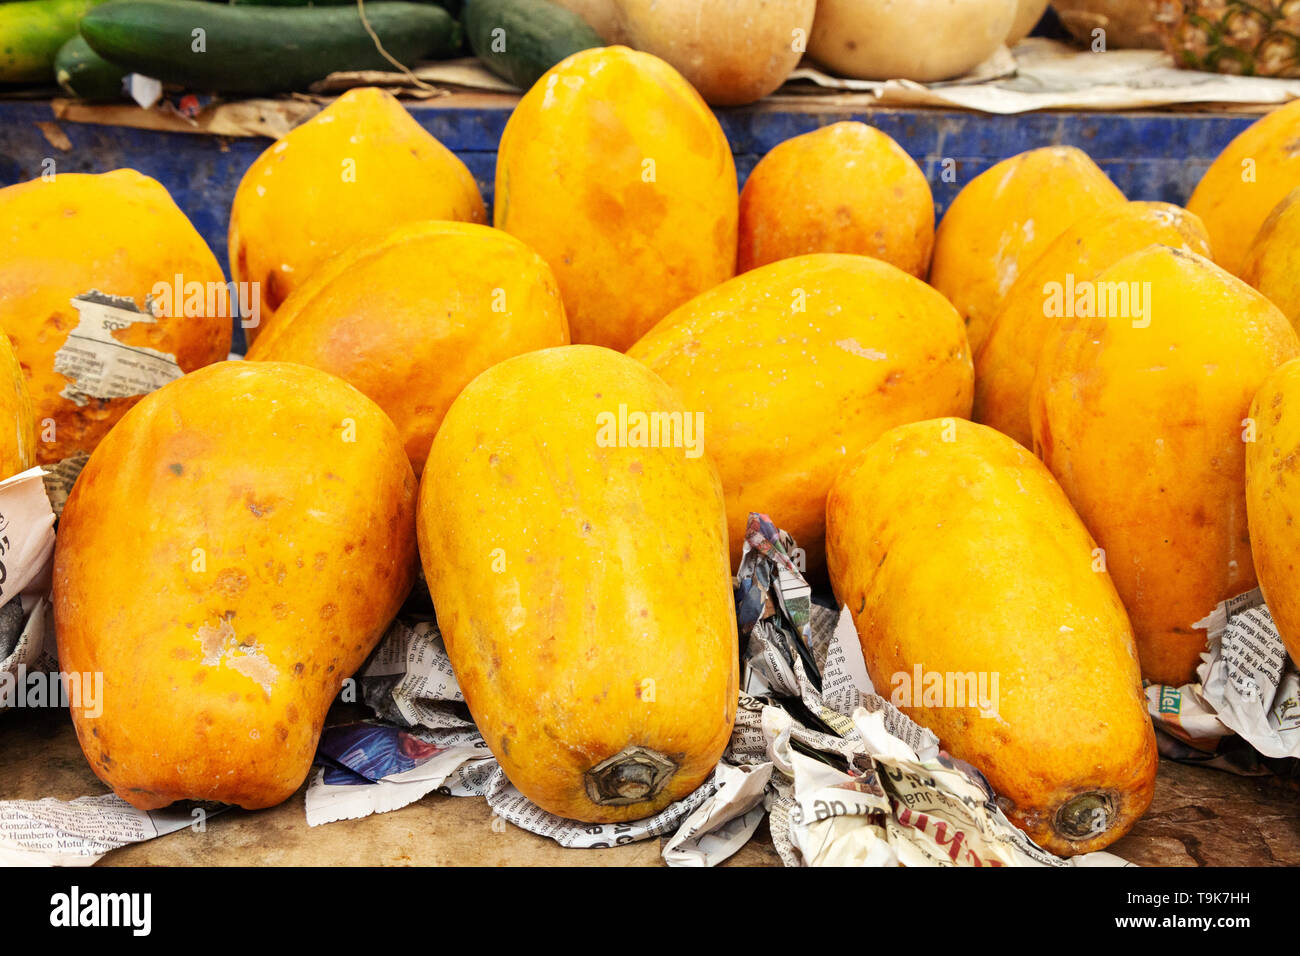 Papayas or pawpaws for sale on a market stall in Mexico, Latin America Stock Photo